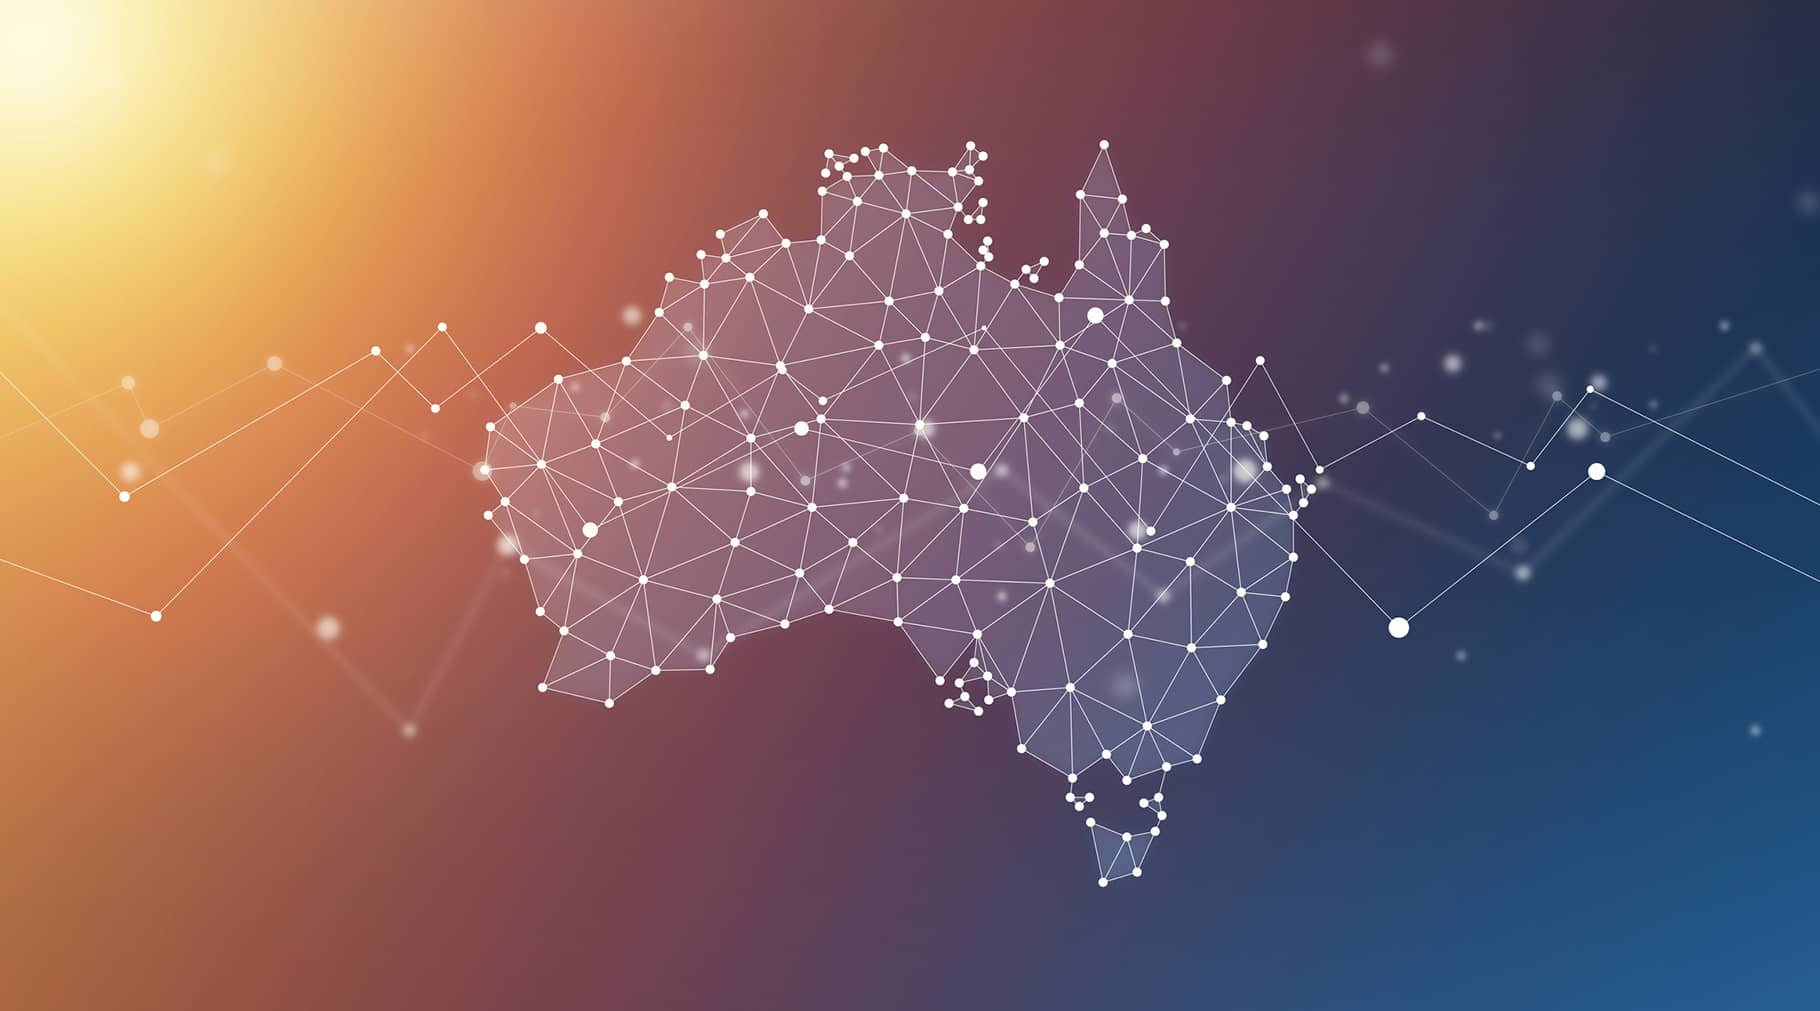 How Connected Do You Feel In The Workplace? 4 Insights From Our Australia Connectivity Report